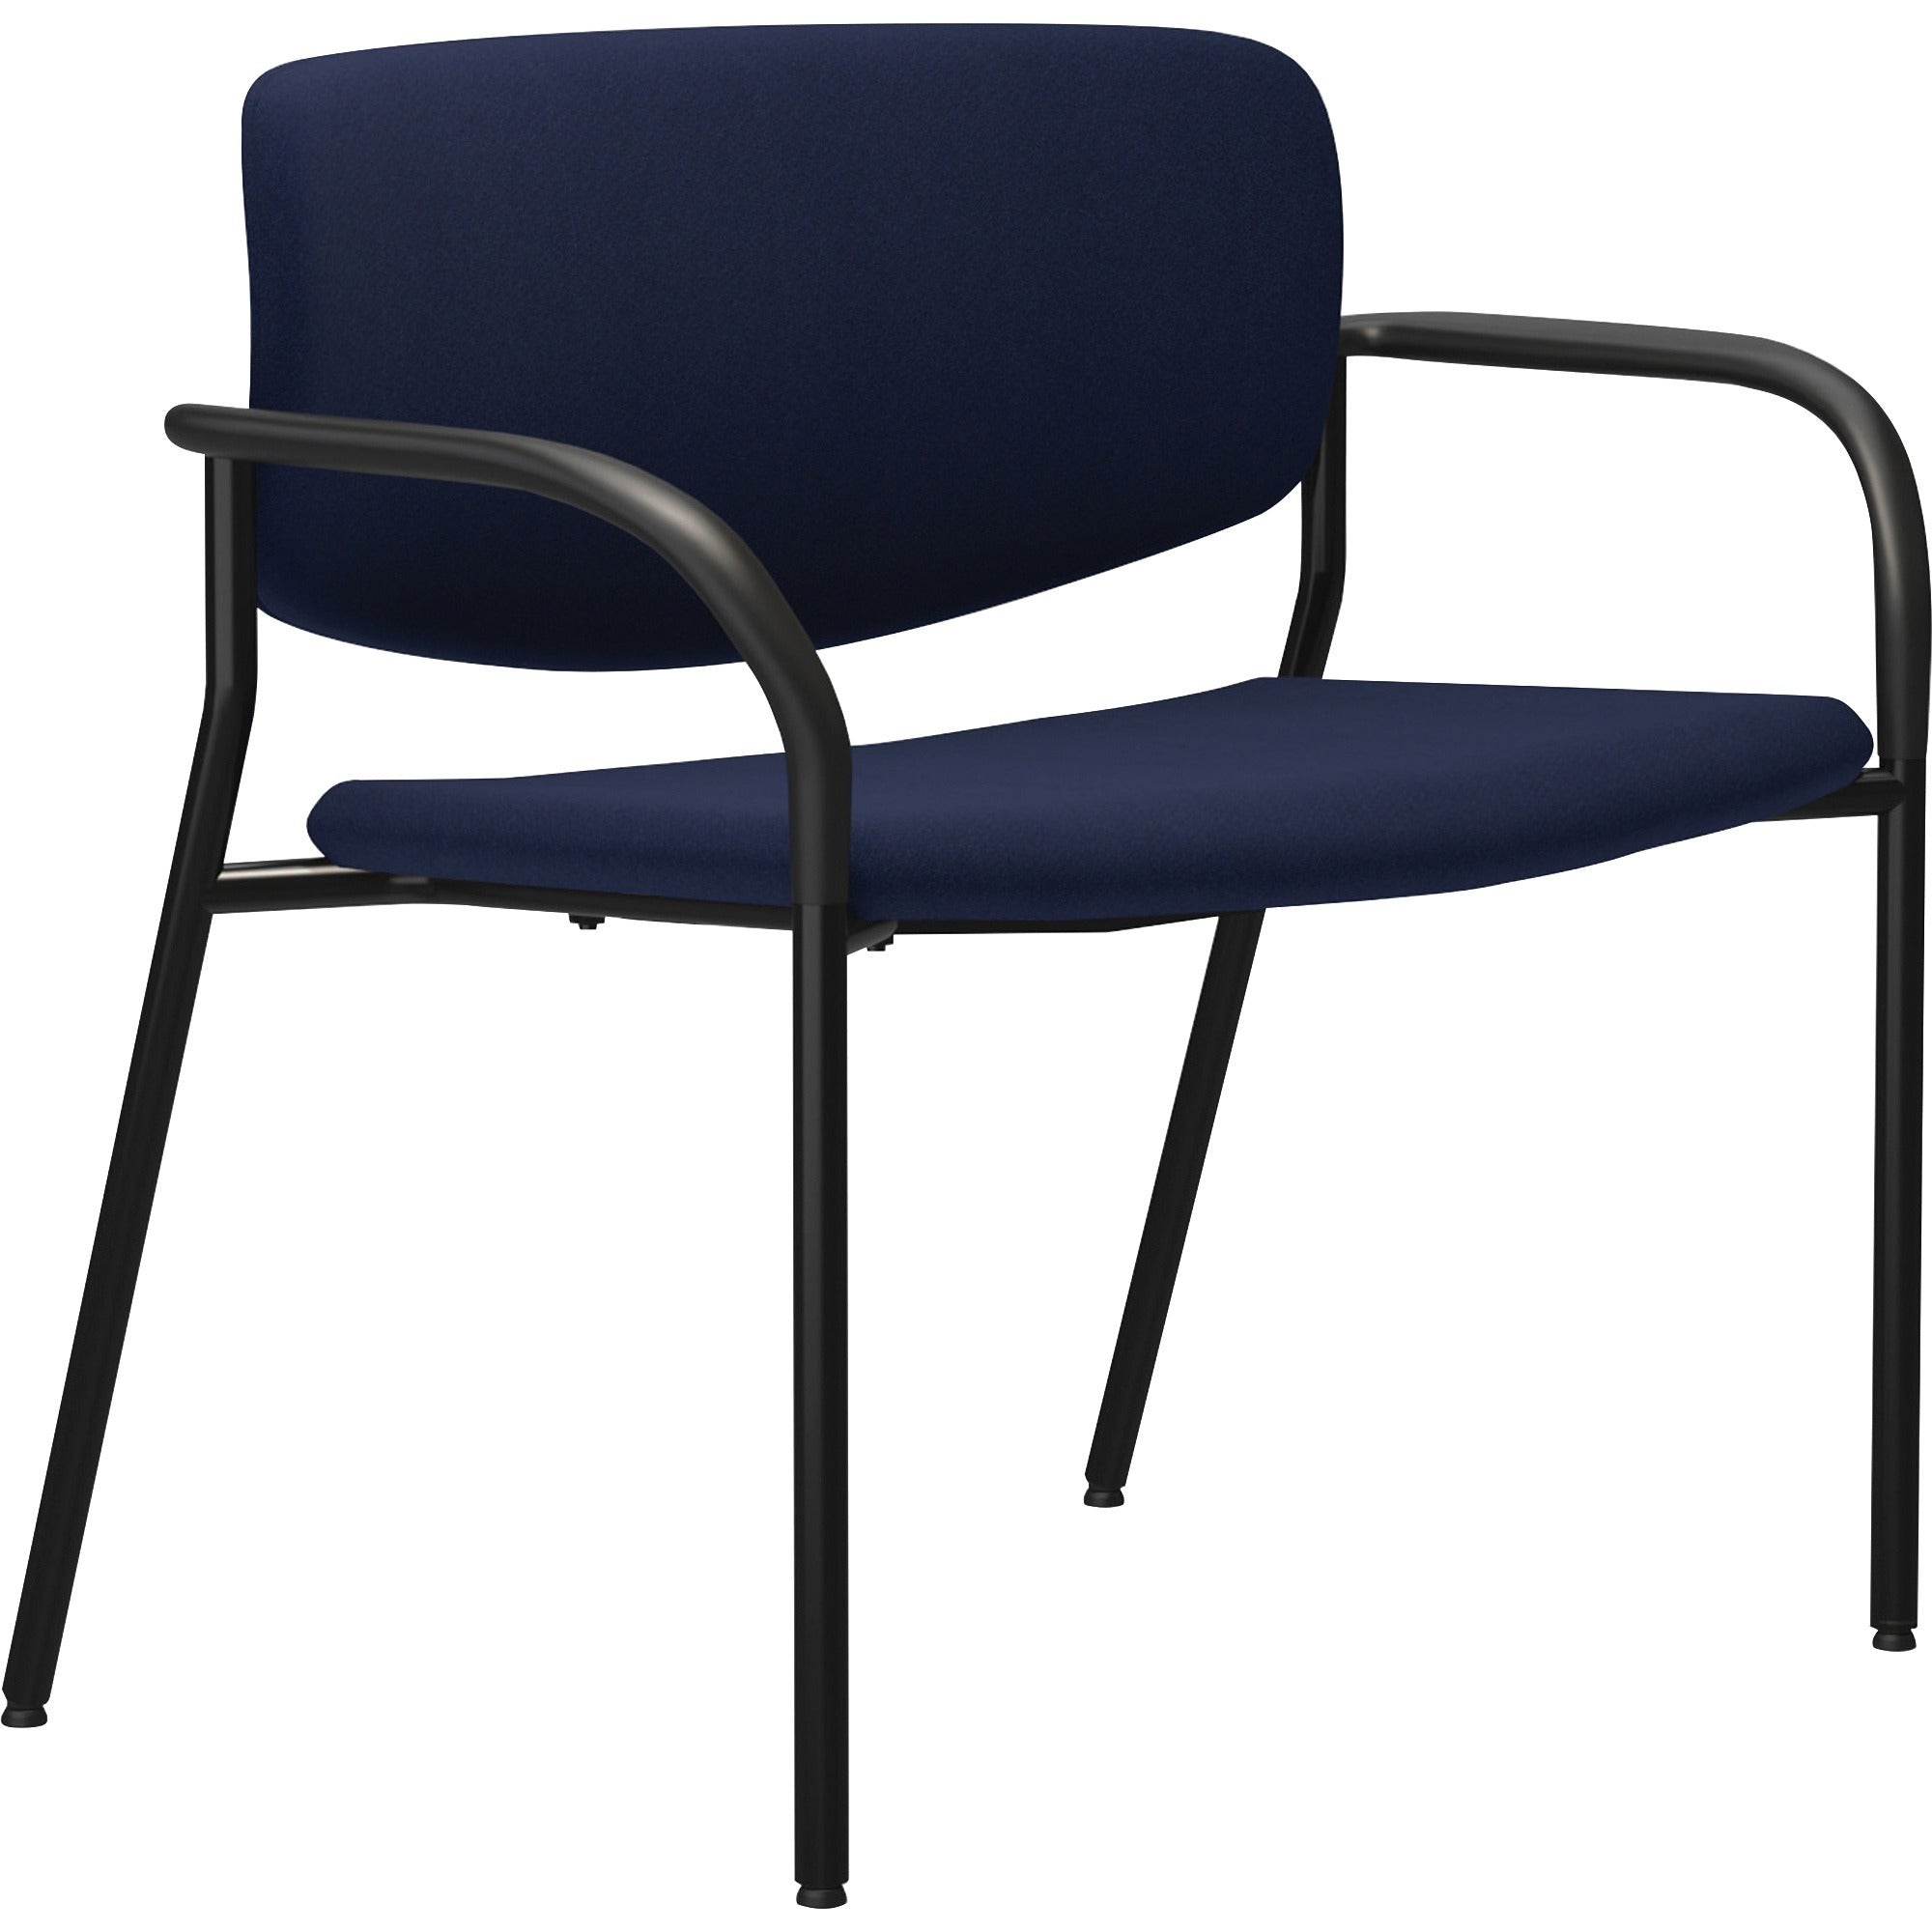 lorell-avent-big-&-tall-upholstered-guest-chair-with-arms-dark-blue-steel-crepe-fabric-seat-dark-blue-steel-back-powder-coated-black-tubular-steel-frame-four-legged-base-armrest-1-each_llr83120a204 - 1